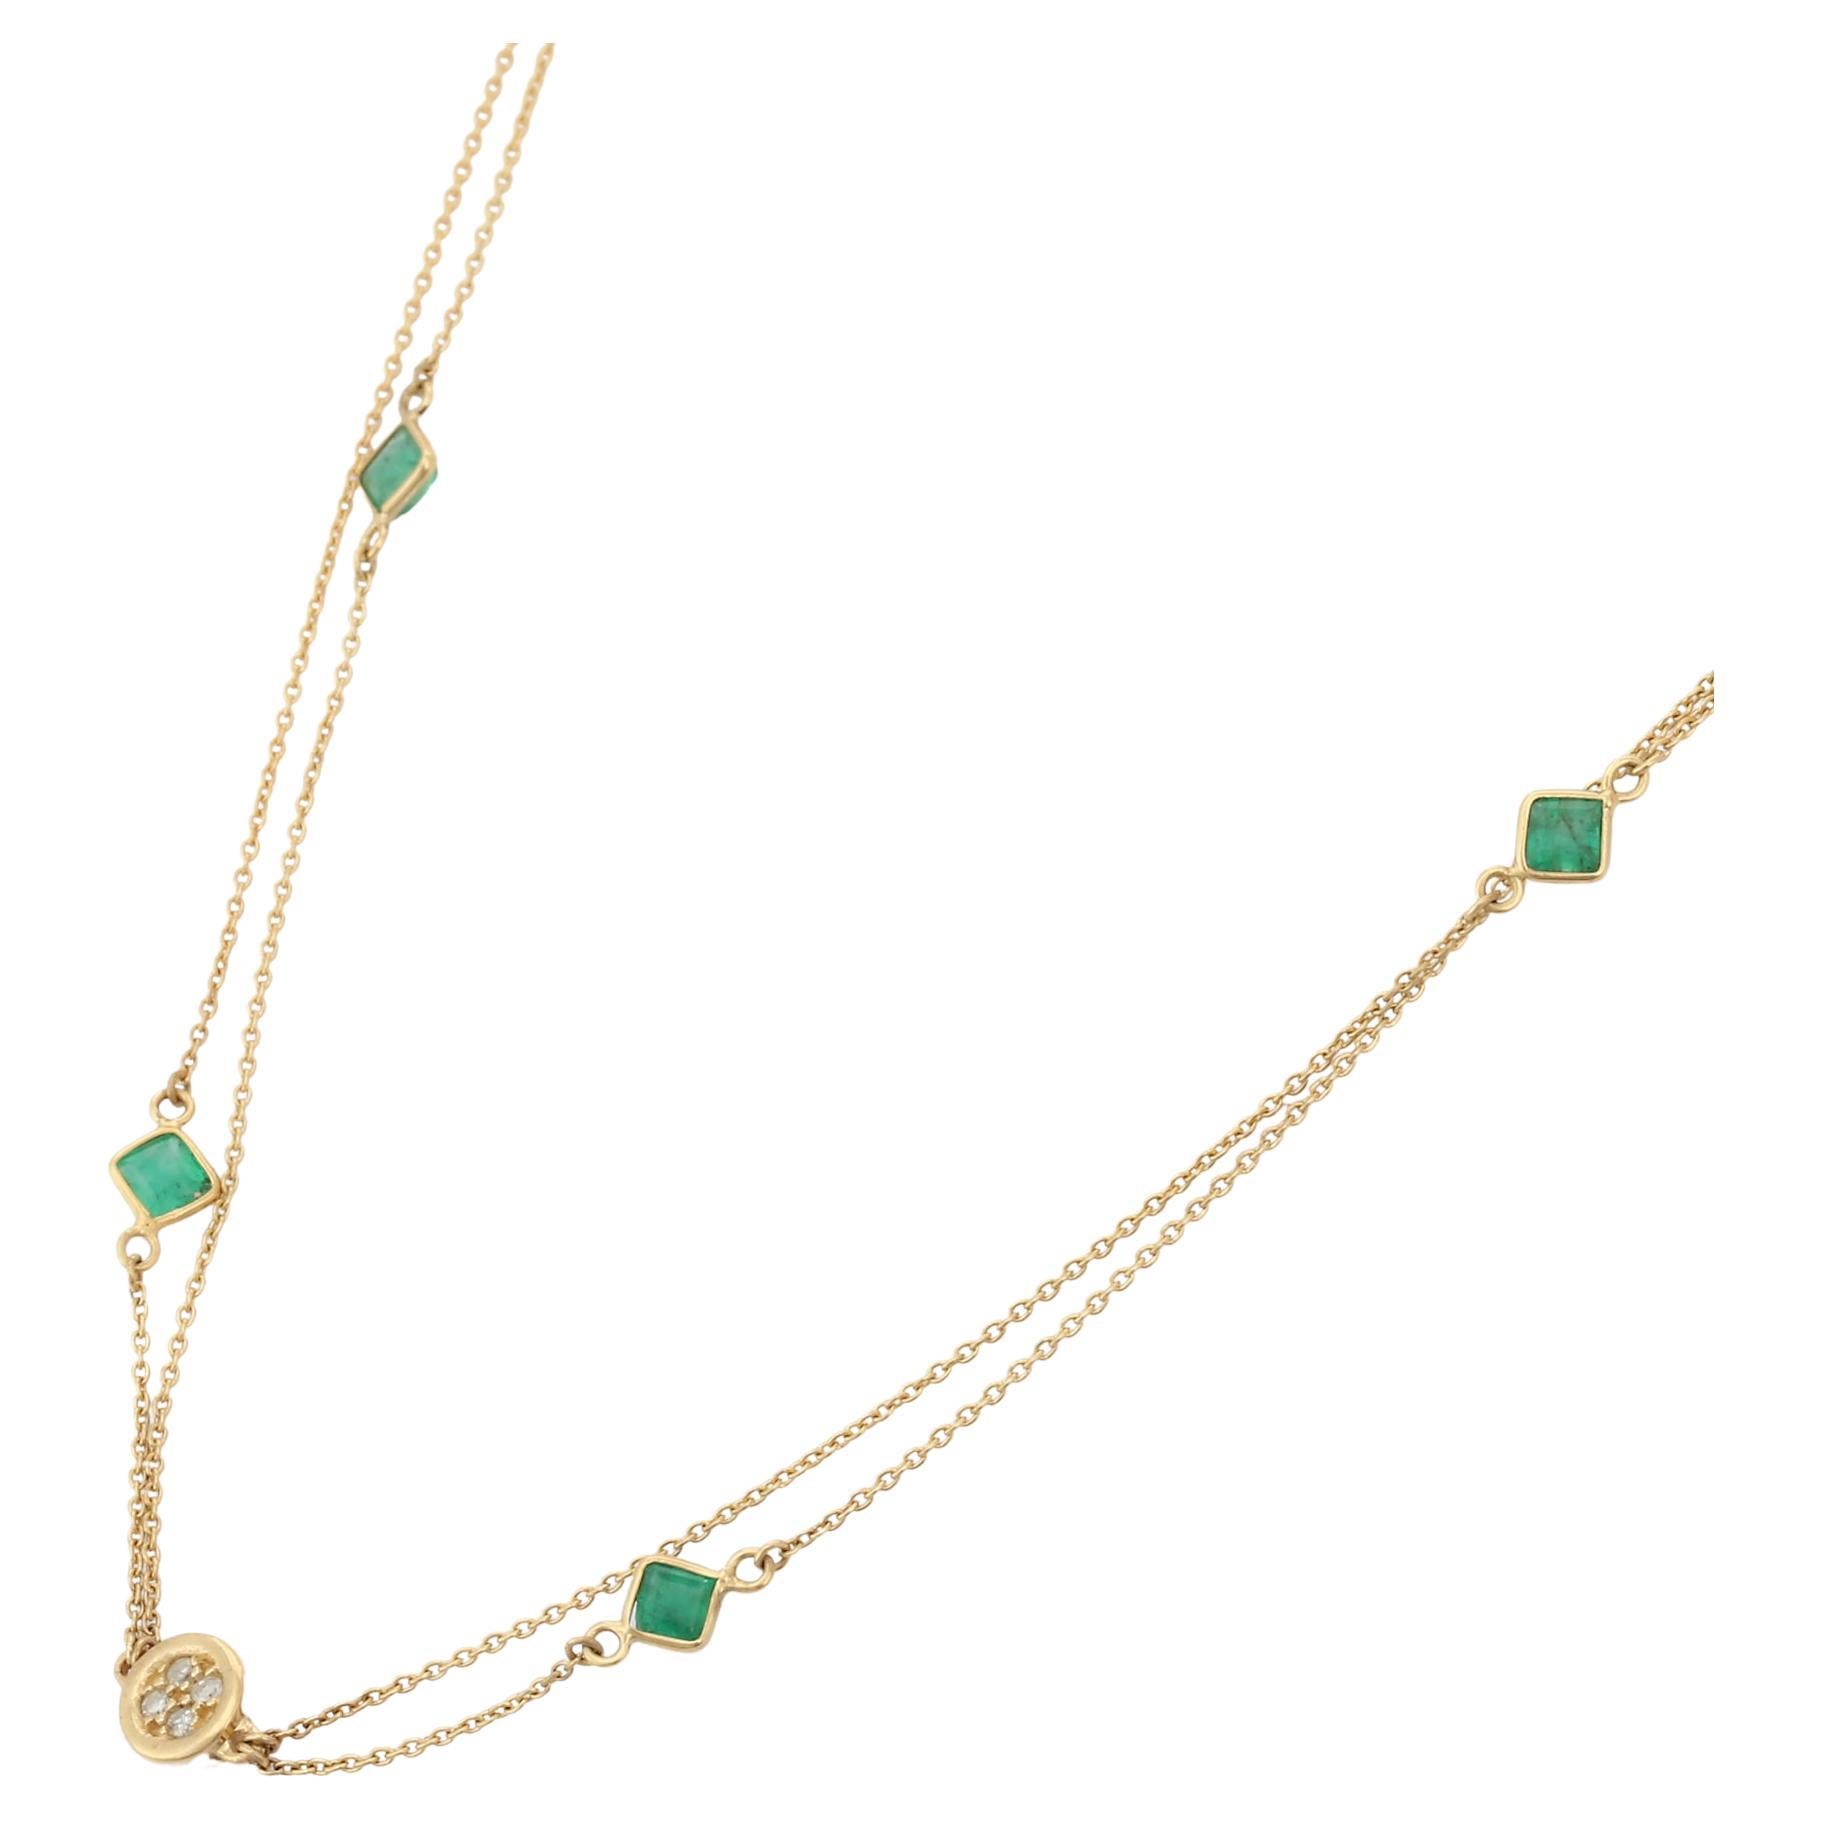 3.75 Carat Emerald Diamond Multi Strained Chain Necklace in 18K Yellow Gold For Sale